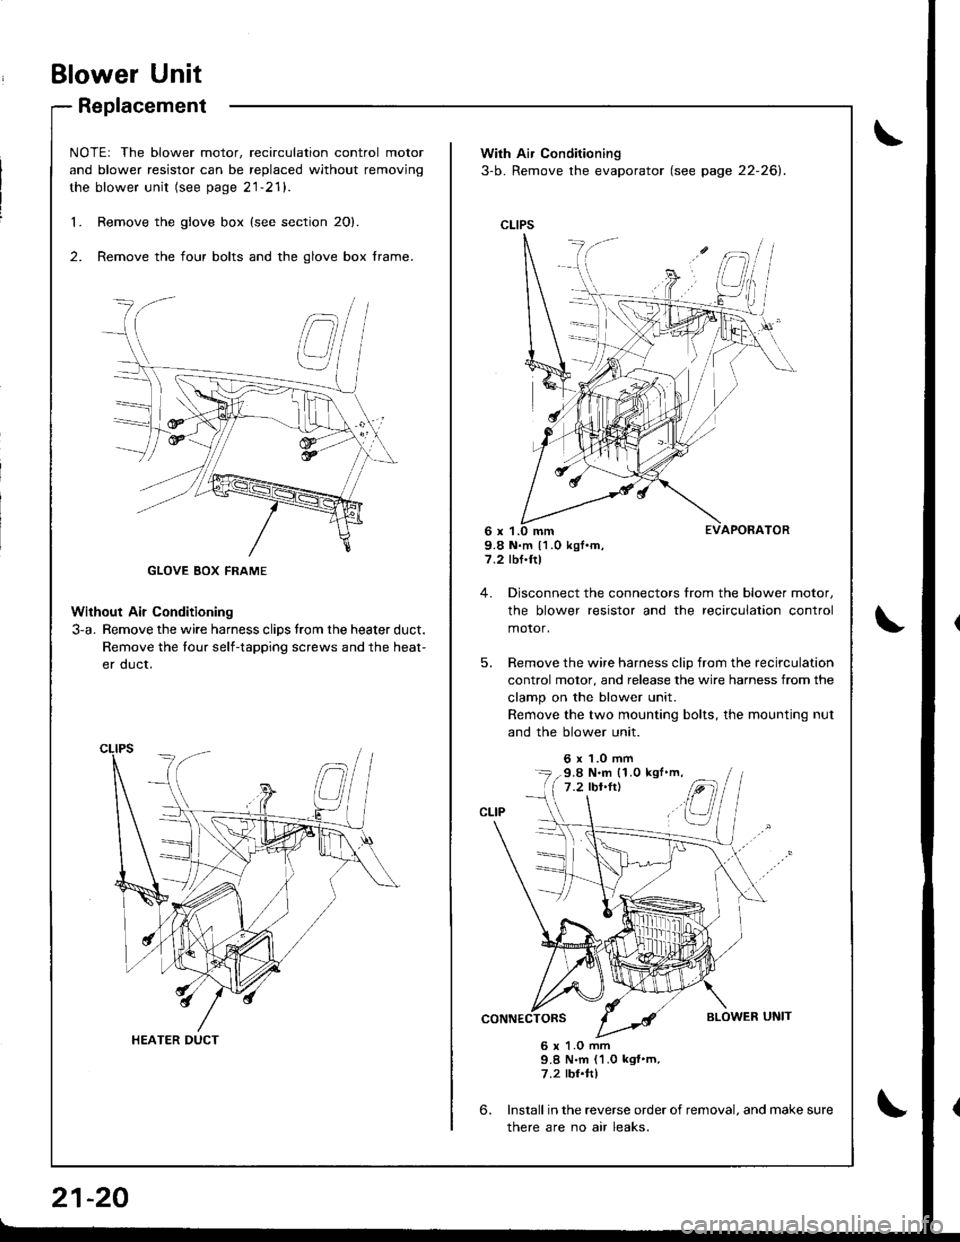 HONDA INTEGRA 1998 4.G Workshop Manual Blower Unit
Replacement
NOTEr The blower motor, recirculation control motor
and blower resistor can be replaced without removjng
the blower unit (see page 21-21).
Remove the glove box {see section 20}